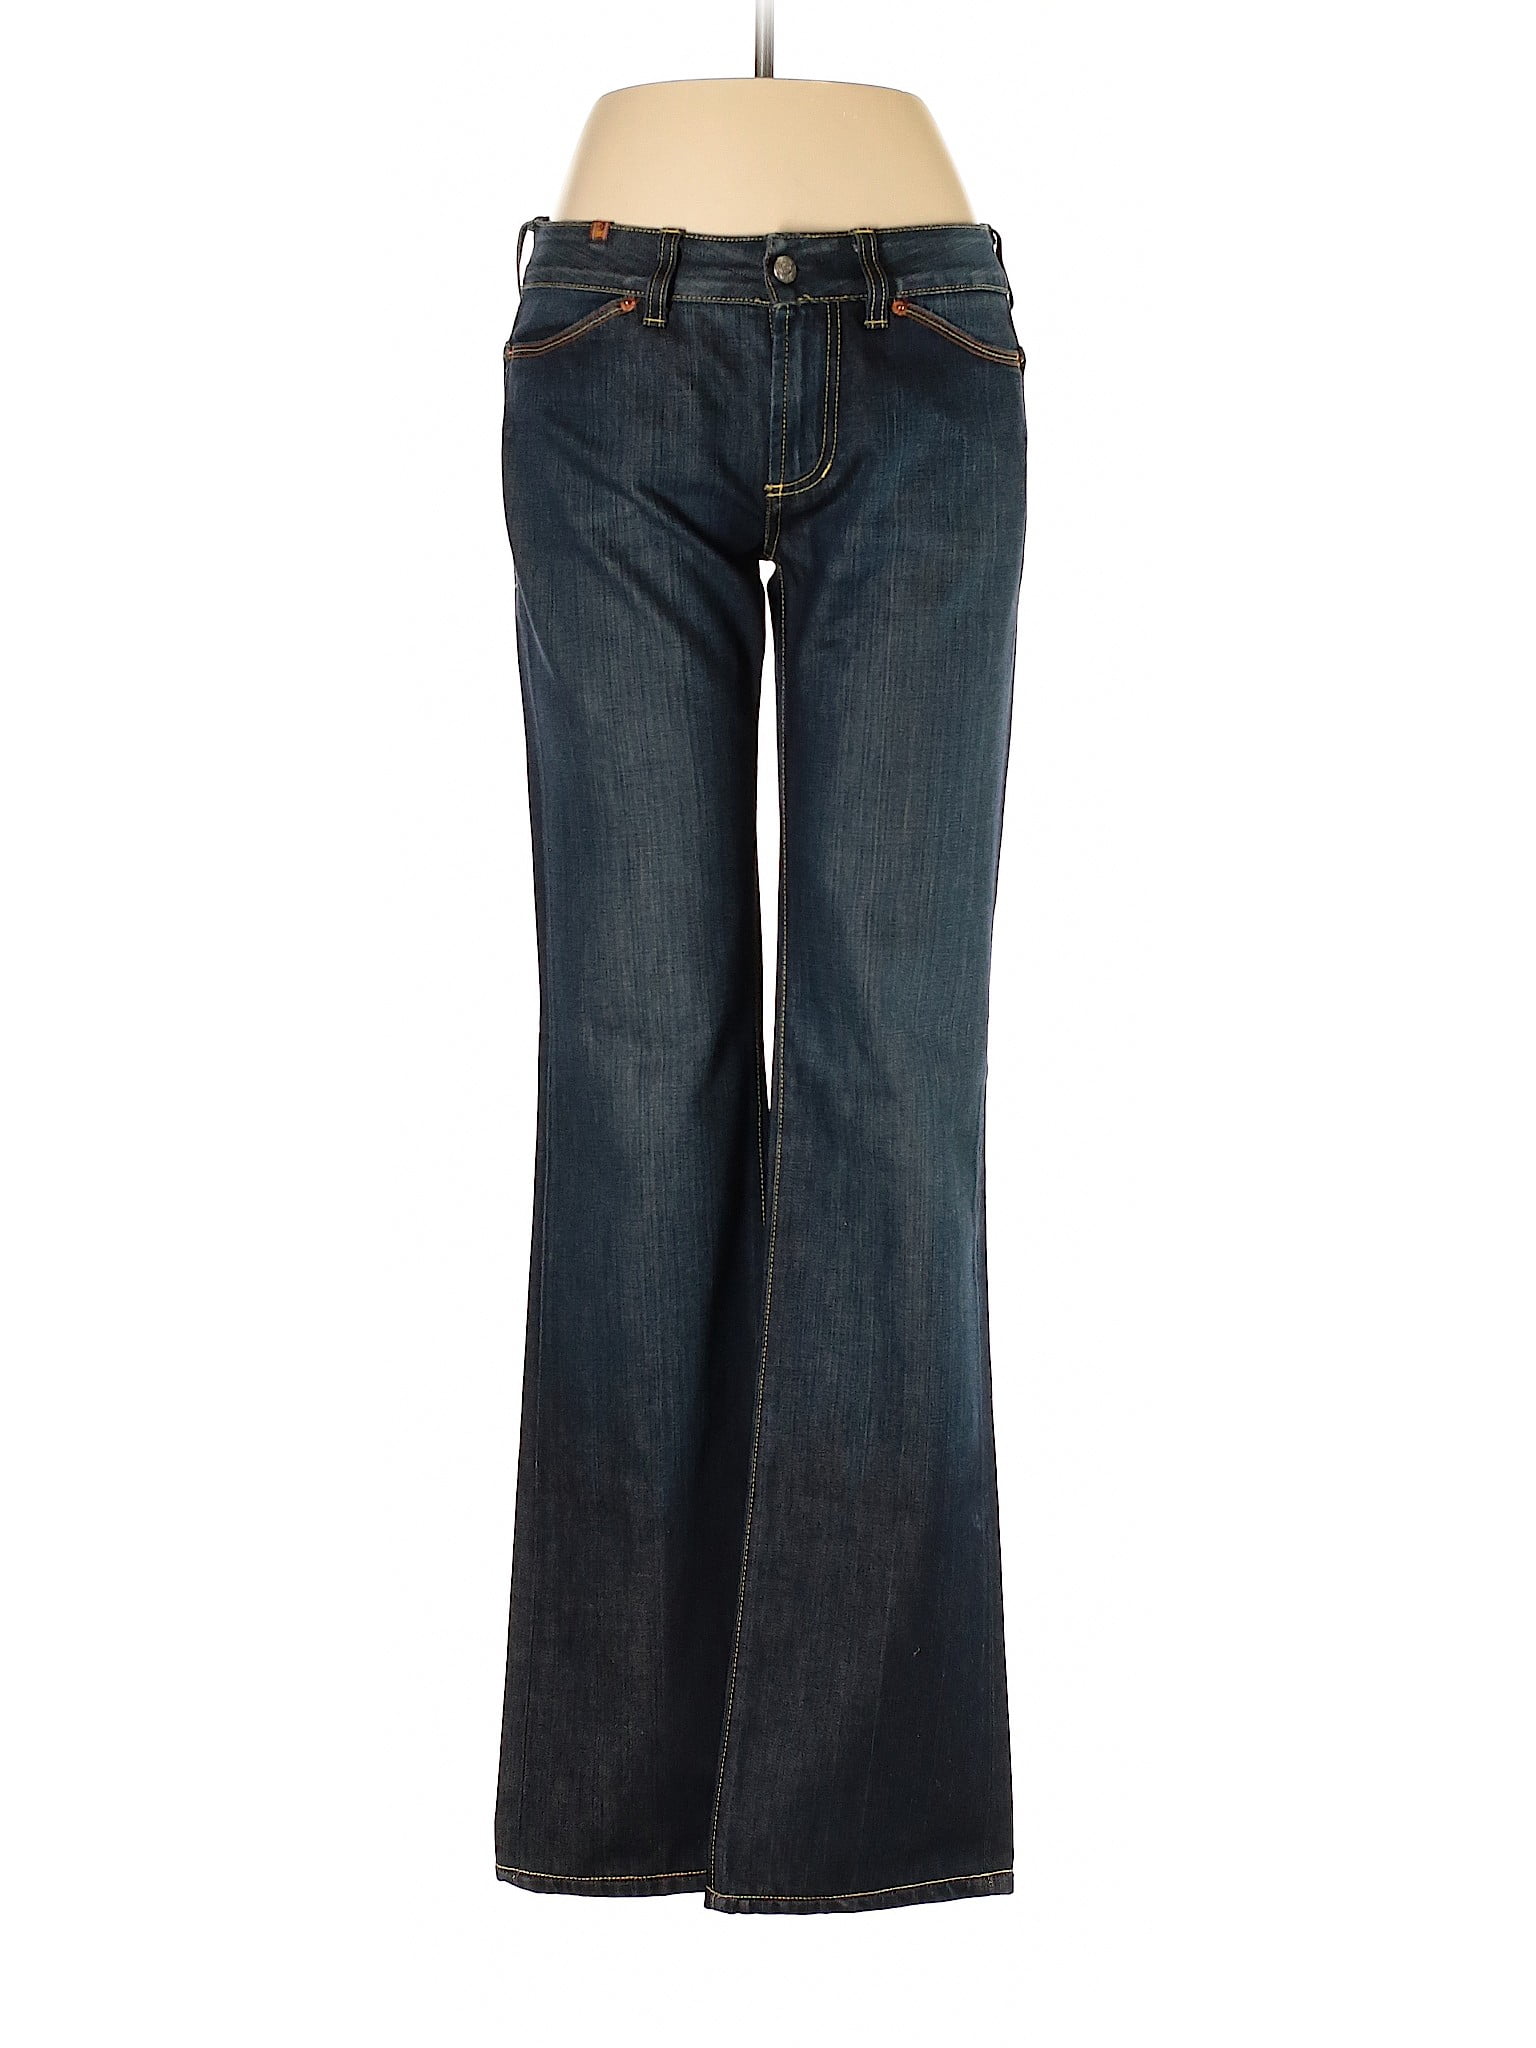 Nfy Jeans - Pre-Owned Nfy jeans Women's Size 29W Jeans - Walmart.com ...